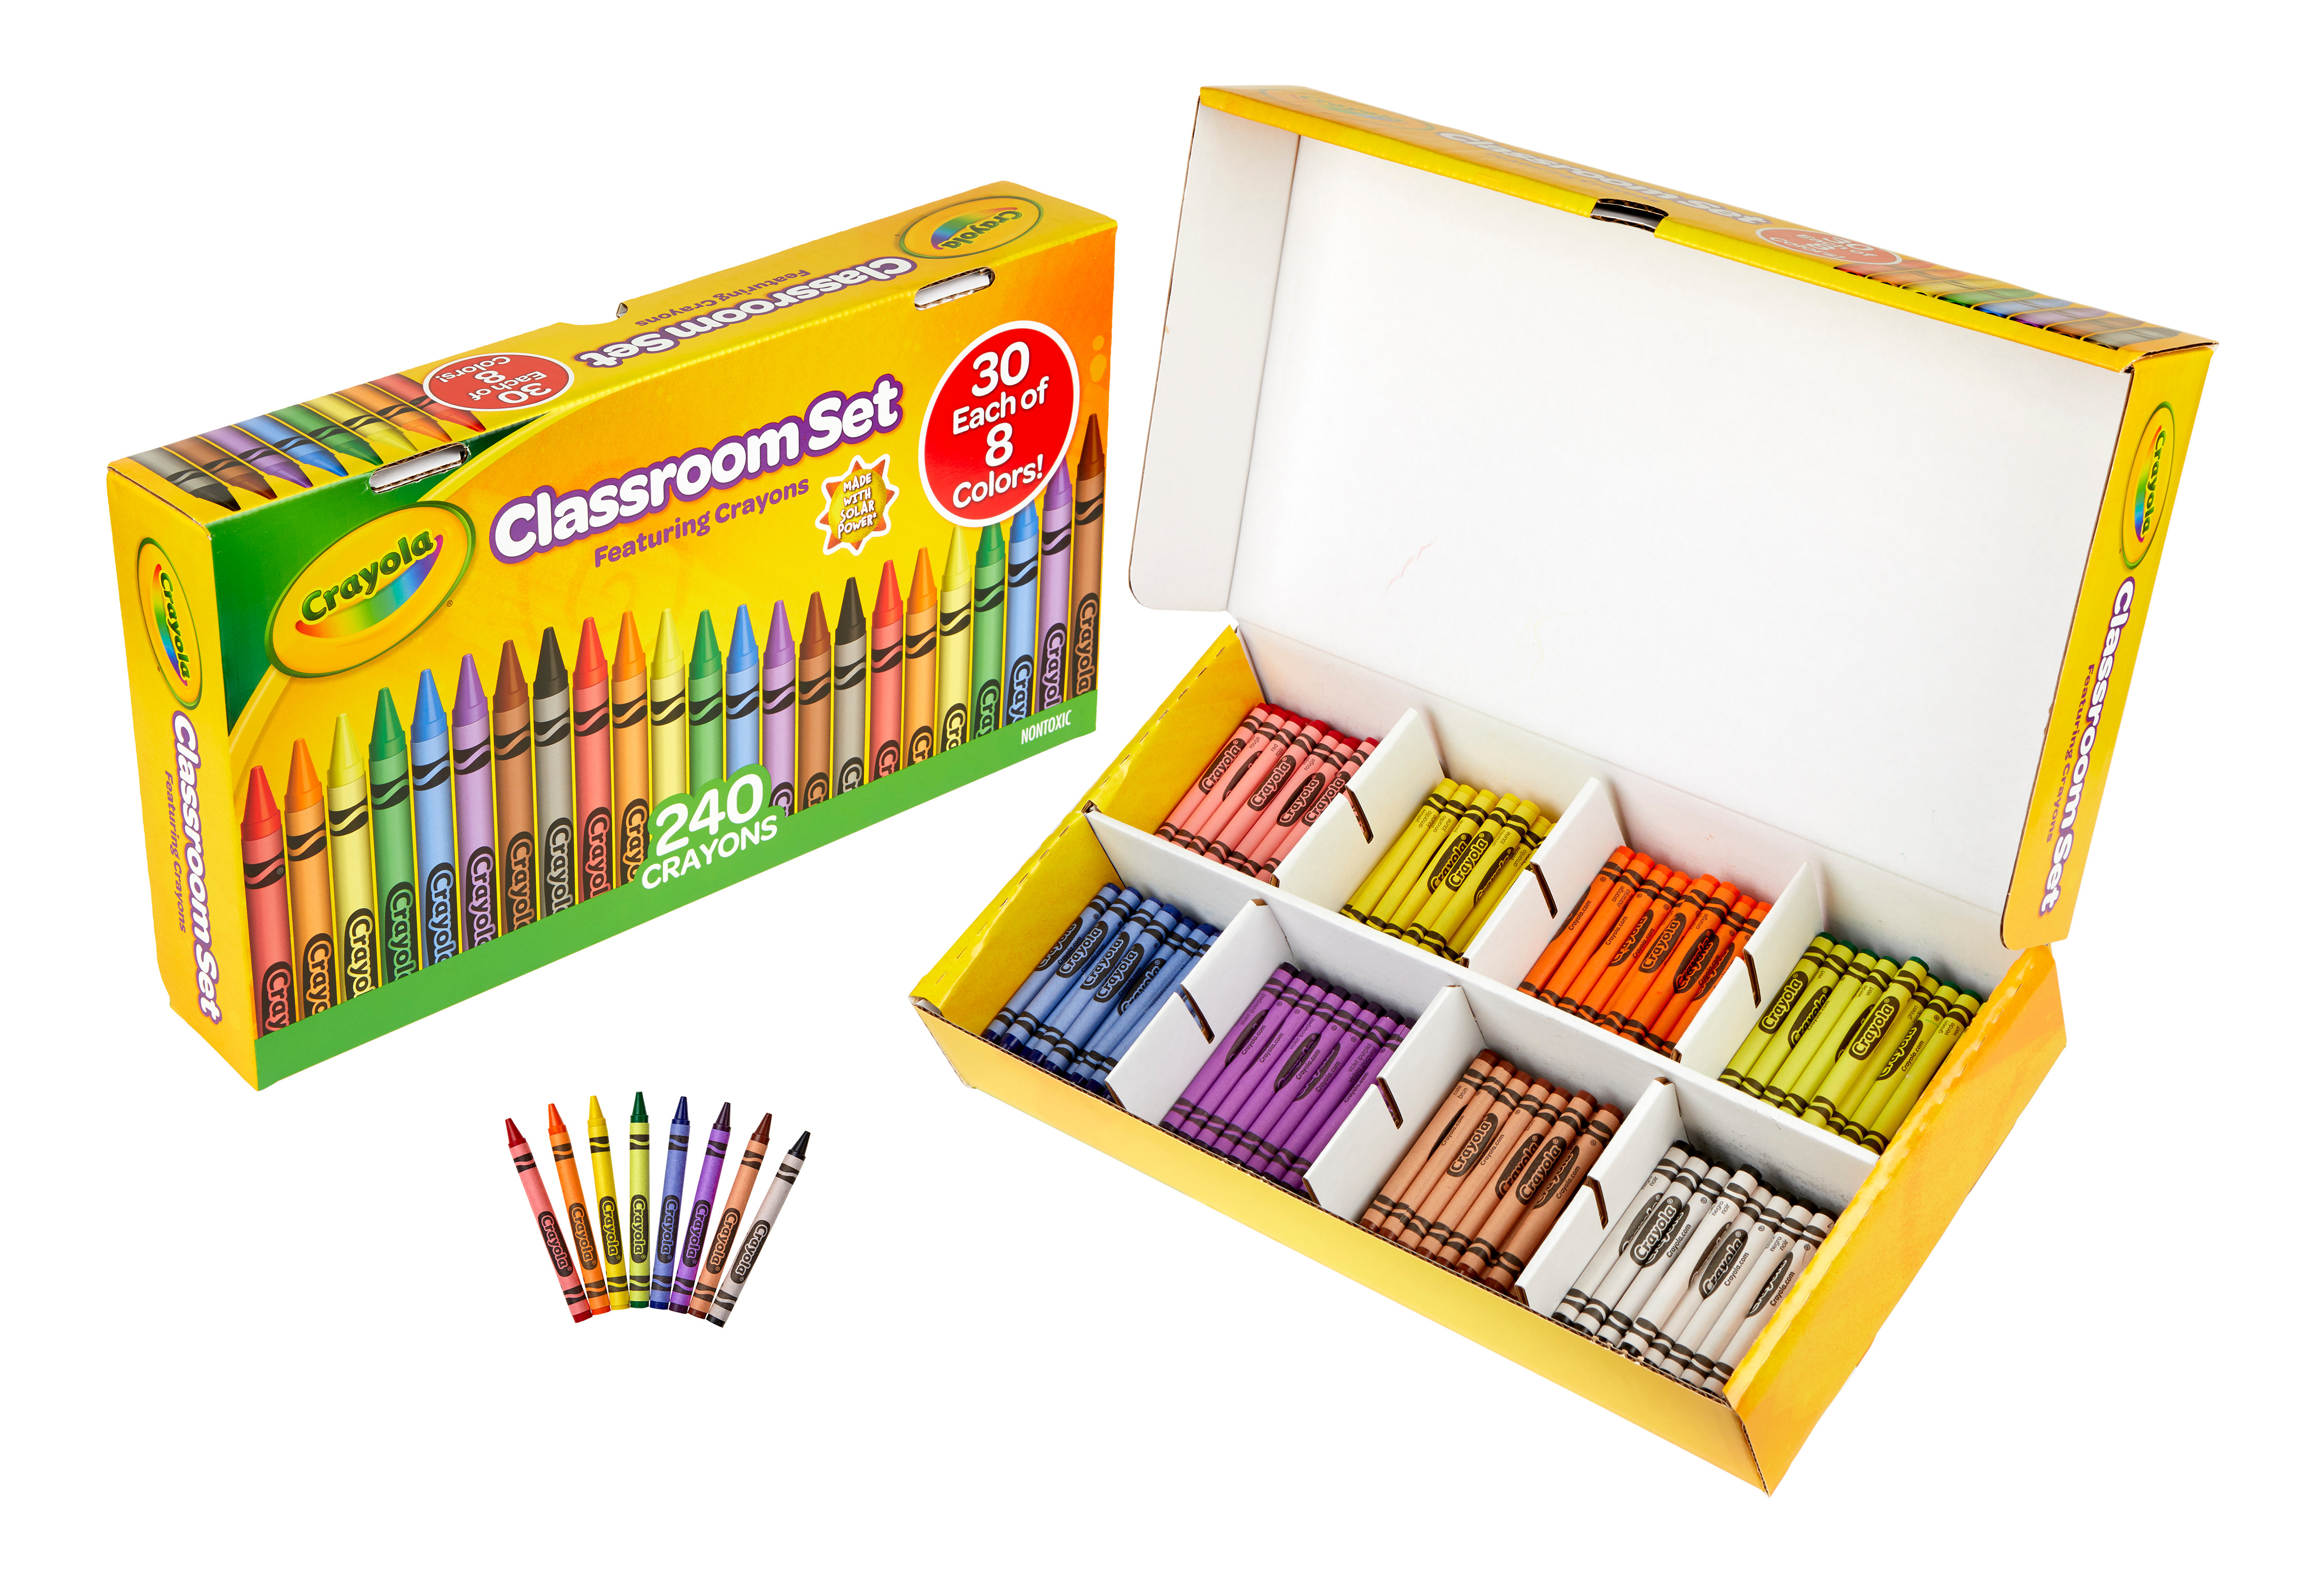 Crayola Classroom Set Crayons, 240 Ct, Teacher Supplies & Gifts, Classroom Supplies, Assorted Colors - image 2 of 9